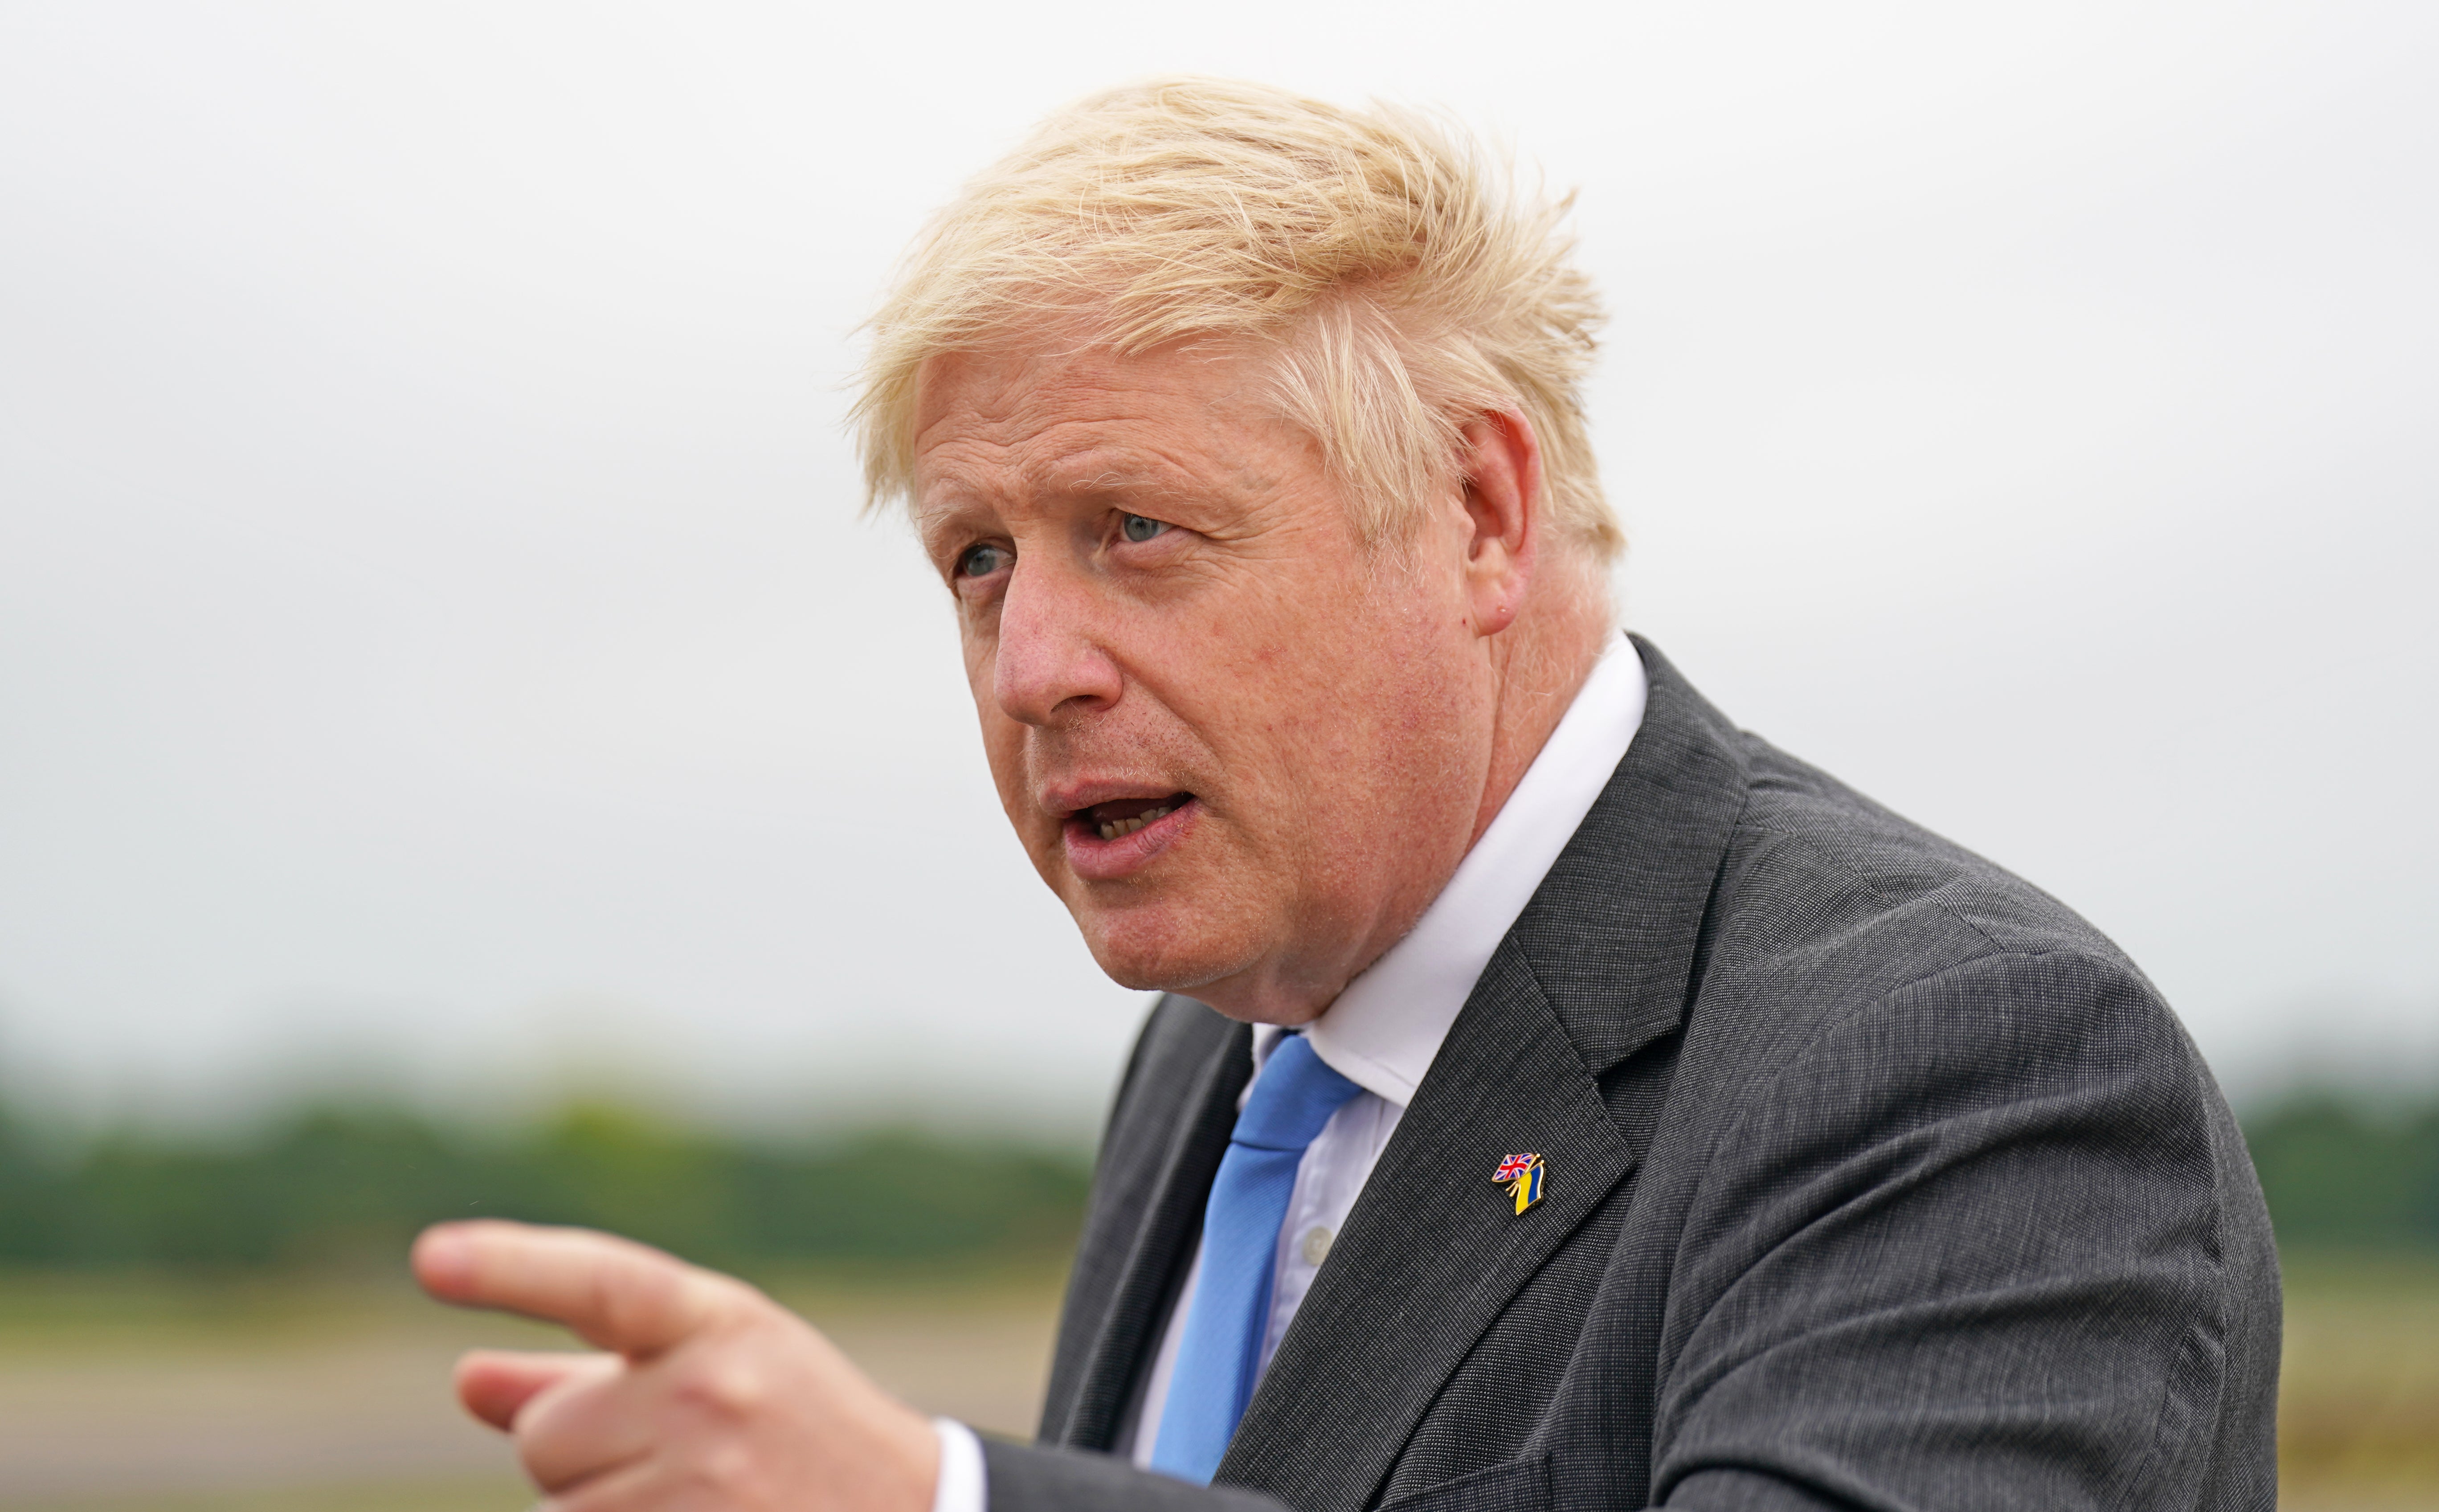 Prime Minister Boris Johnson prepared the public to be braced for more chaos on the railways as he stressed the need for modernisation and reform in the industry (Joe Giddens/PA)